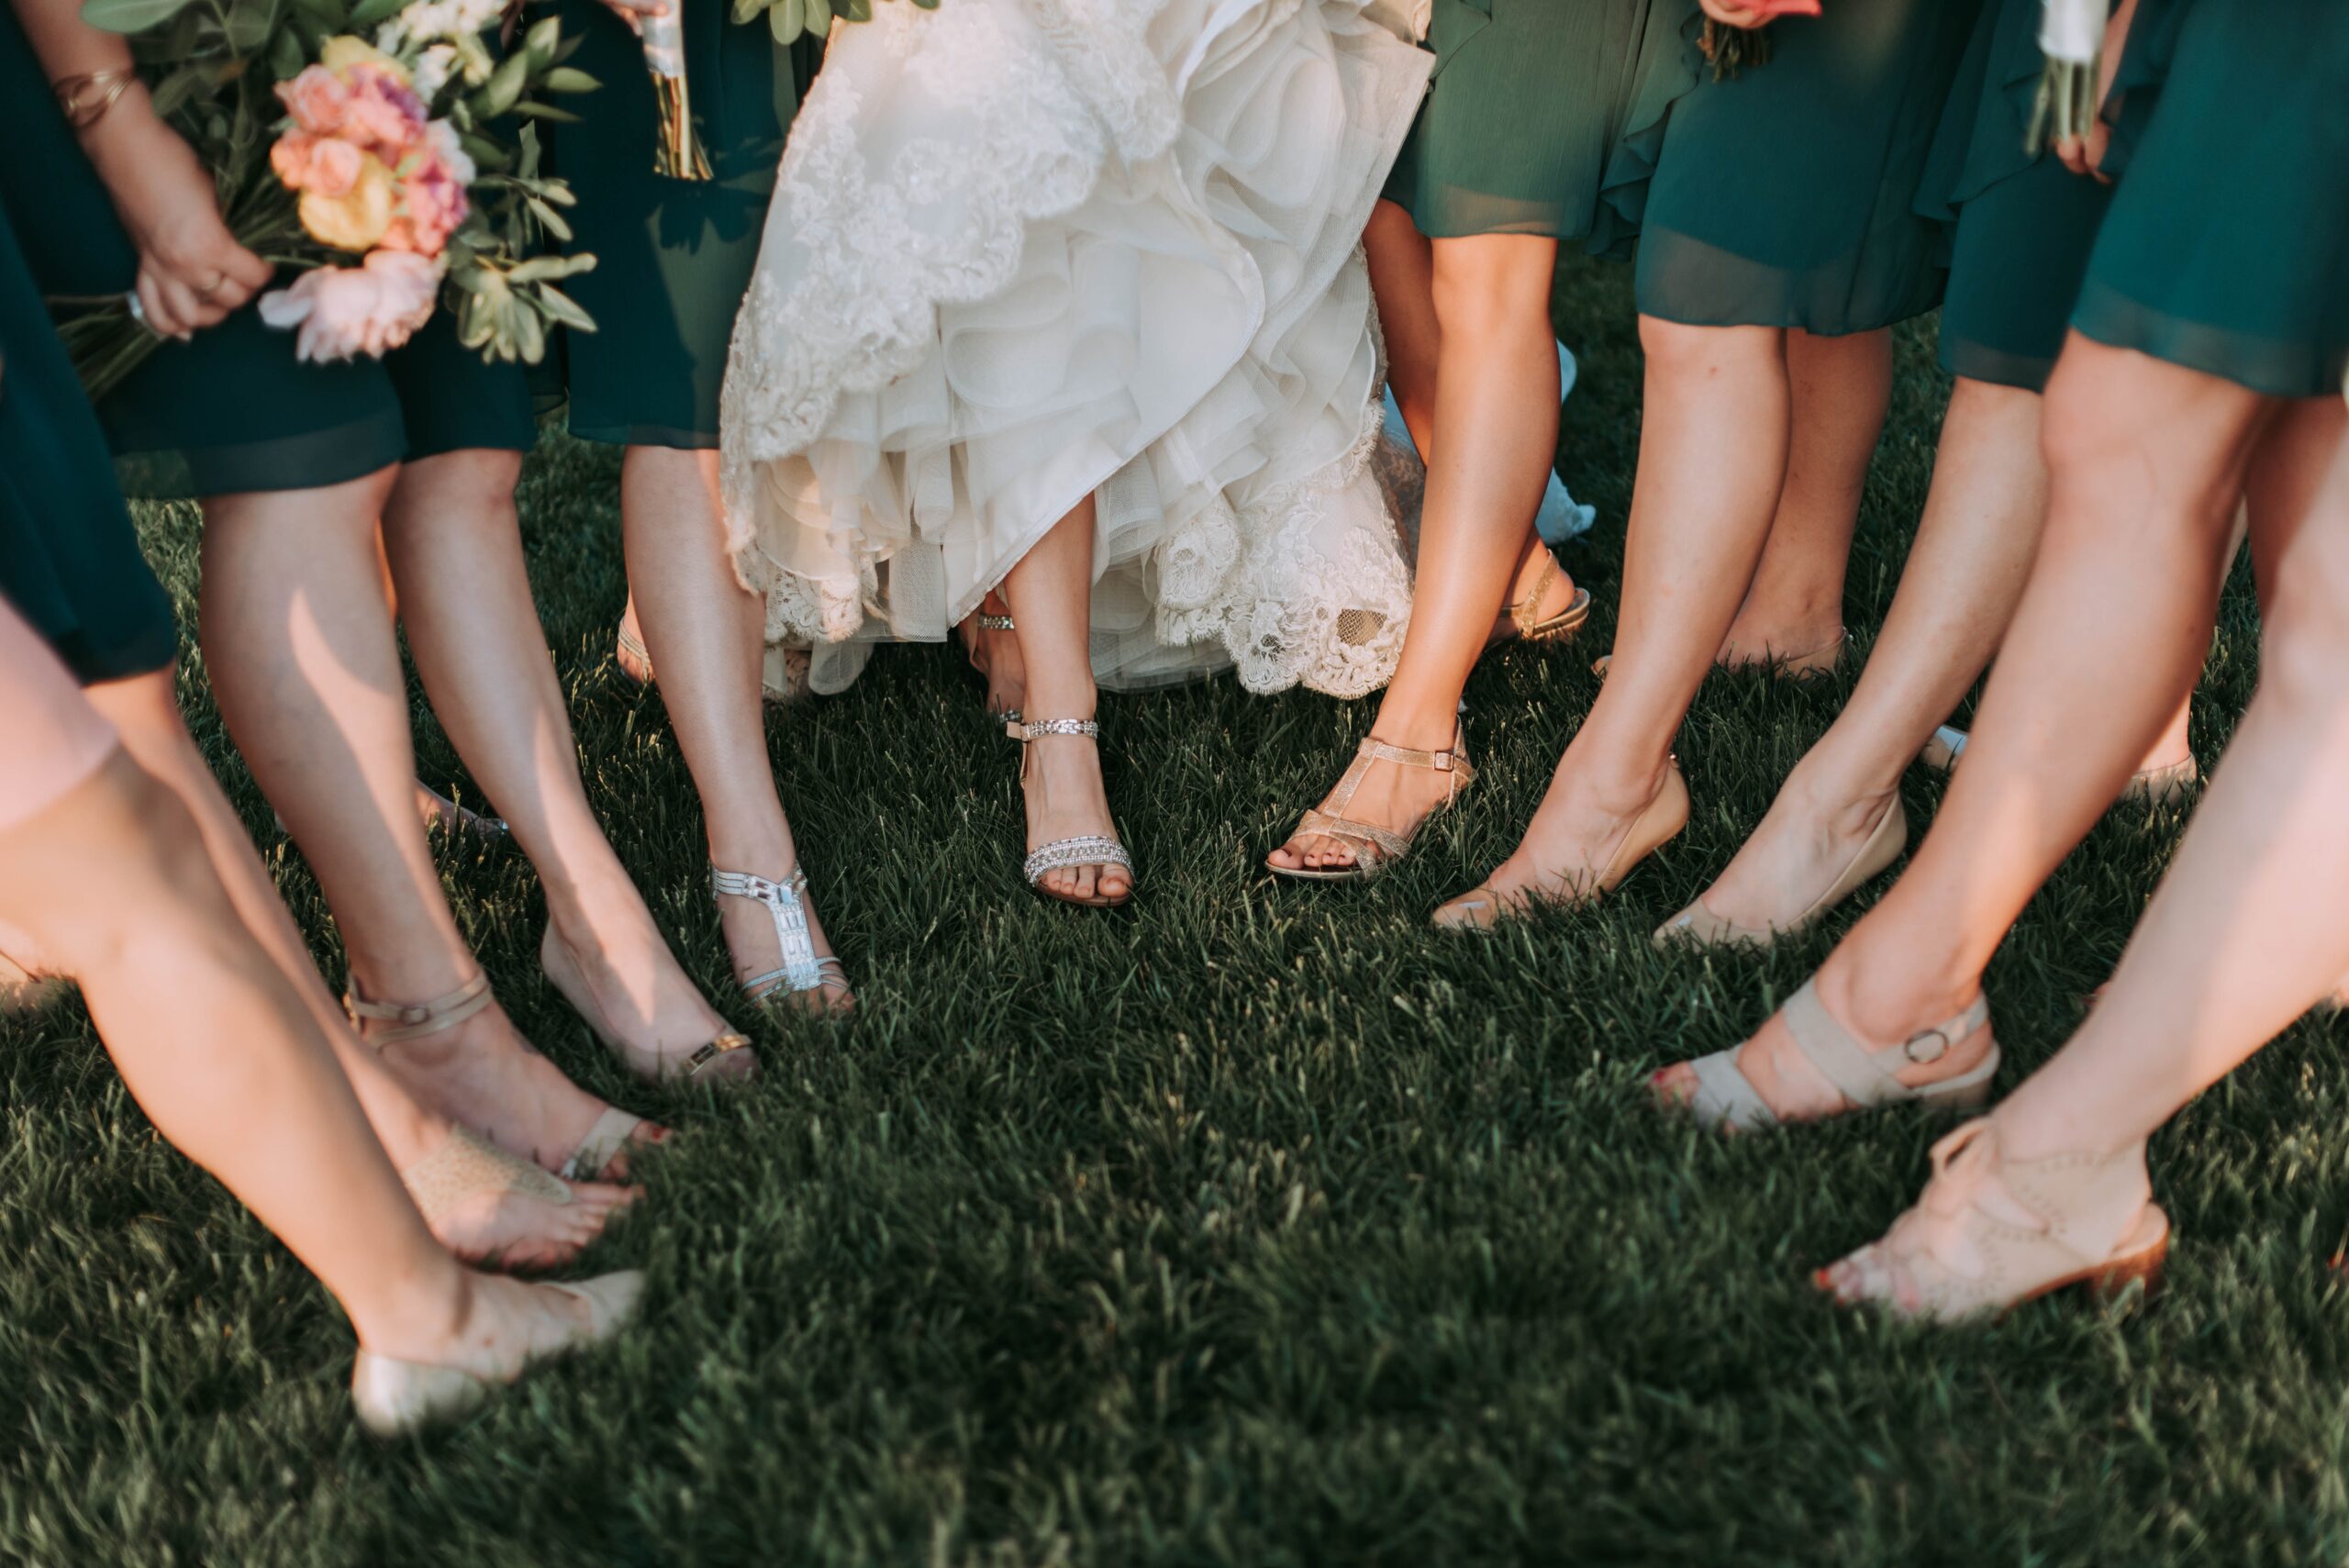 Bridal party putting one foot forward toward the middle for a picture of their feet.